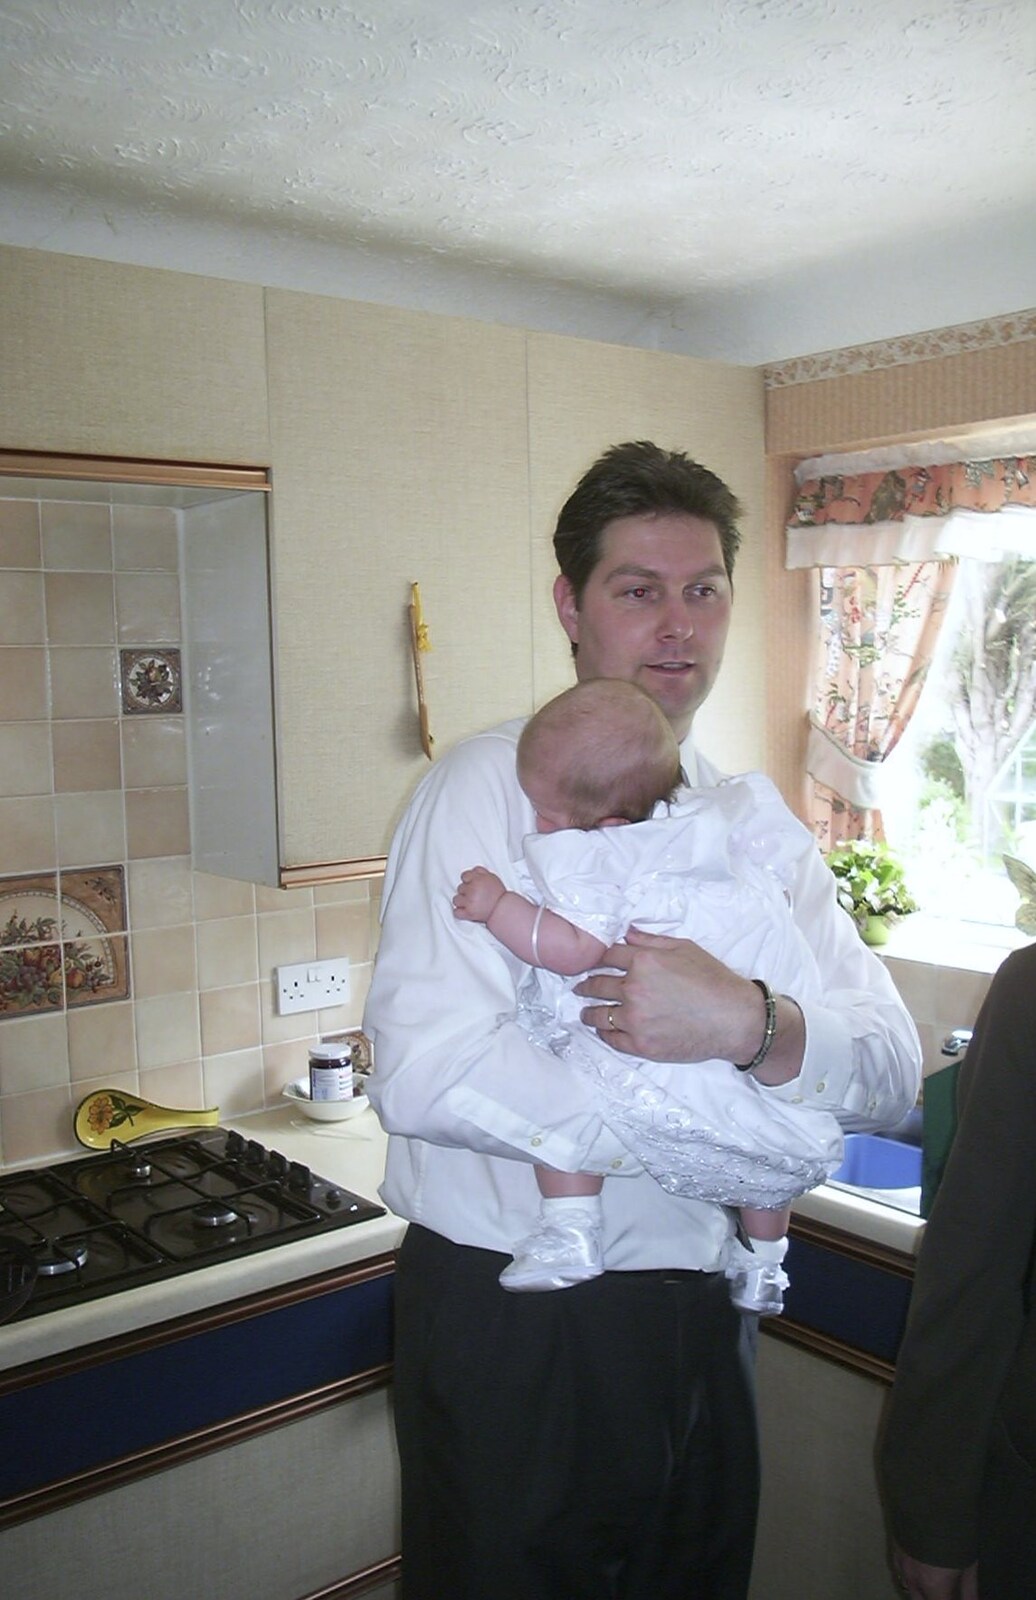 Sean in the kitchen from Sydney's Christening, Hordle, Hampshire - 4th May 2002